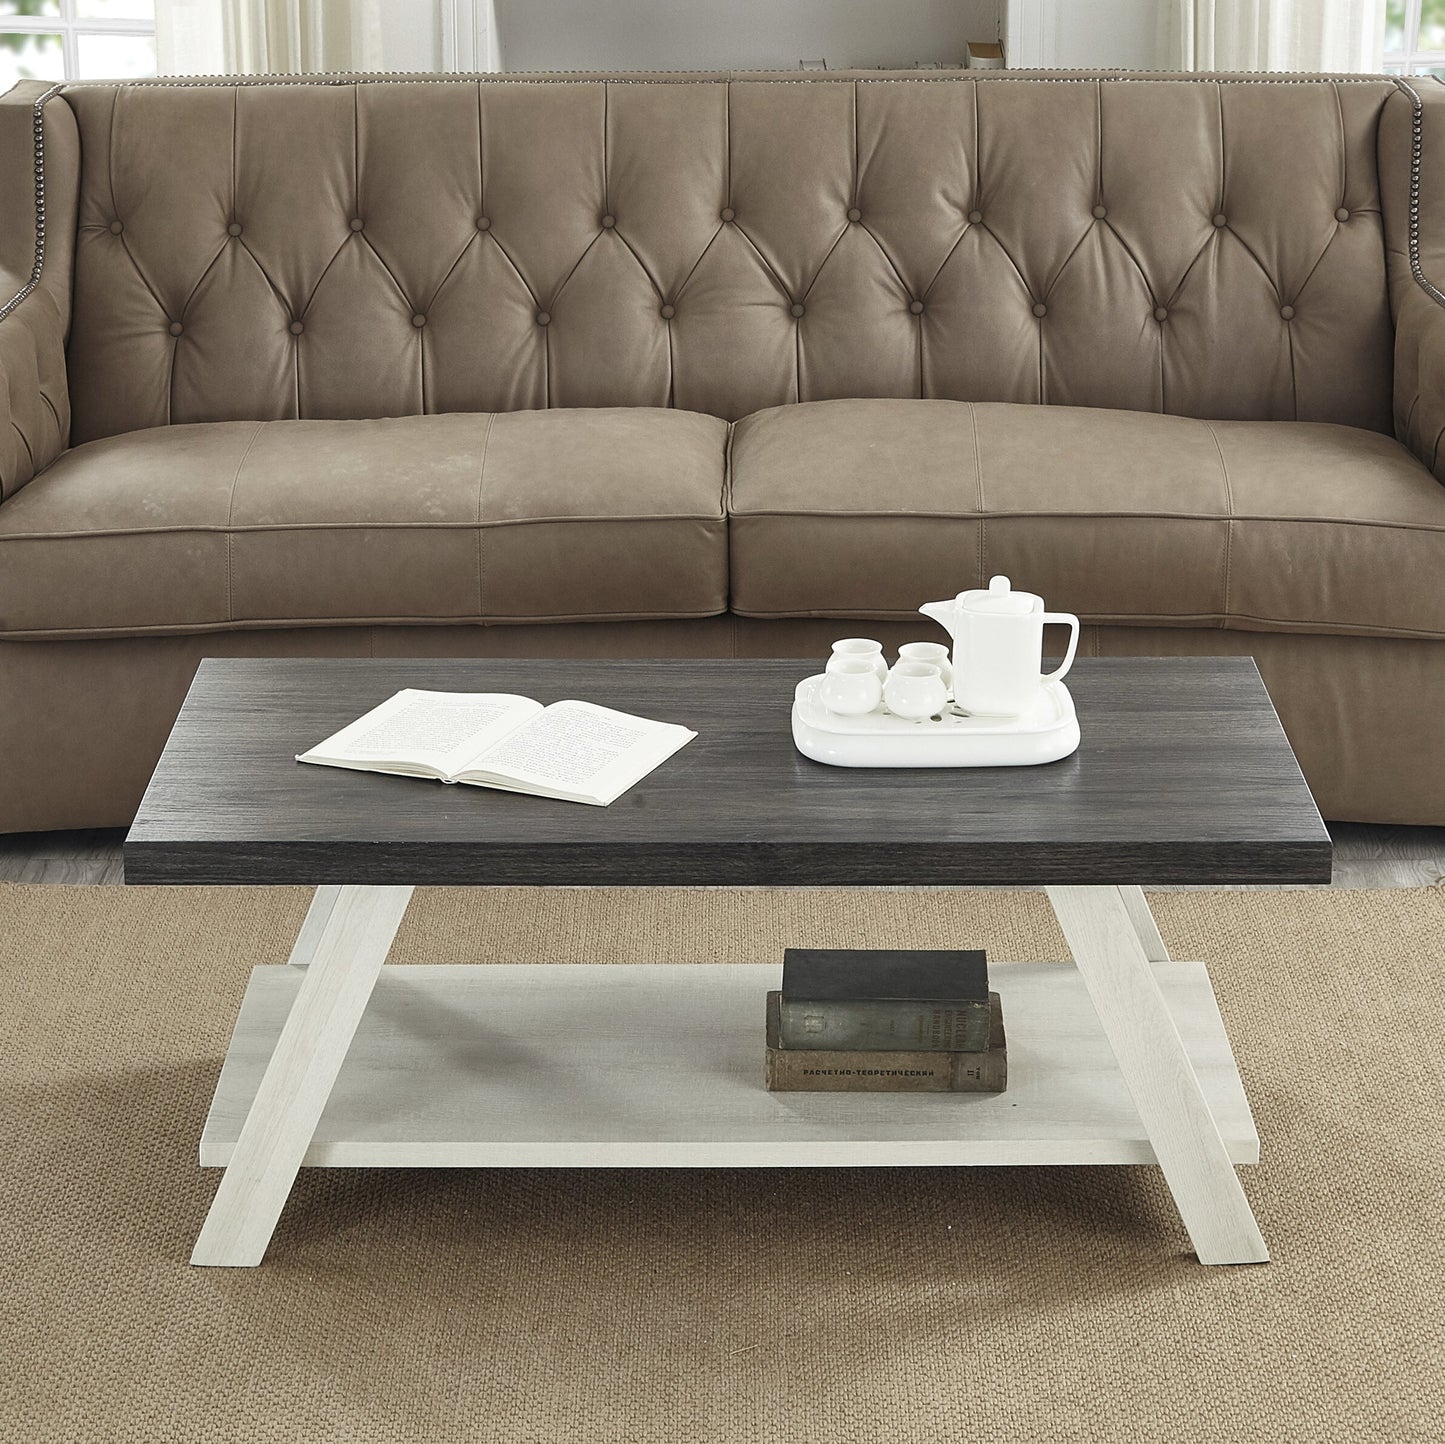 Athens Contemporary Two-Tone Wood Shelf Coffee Table in Weathered Charcoal and Beige